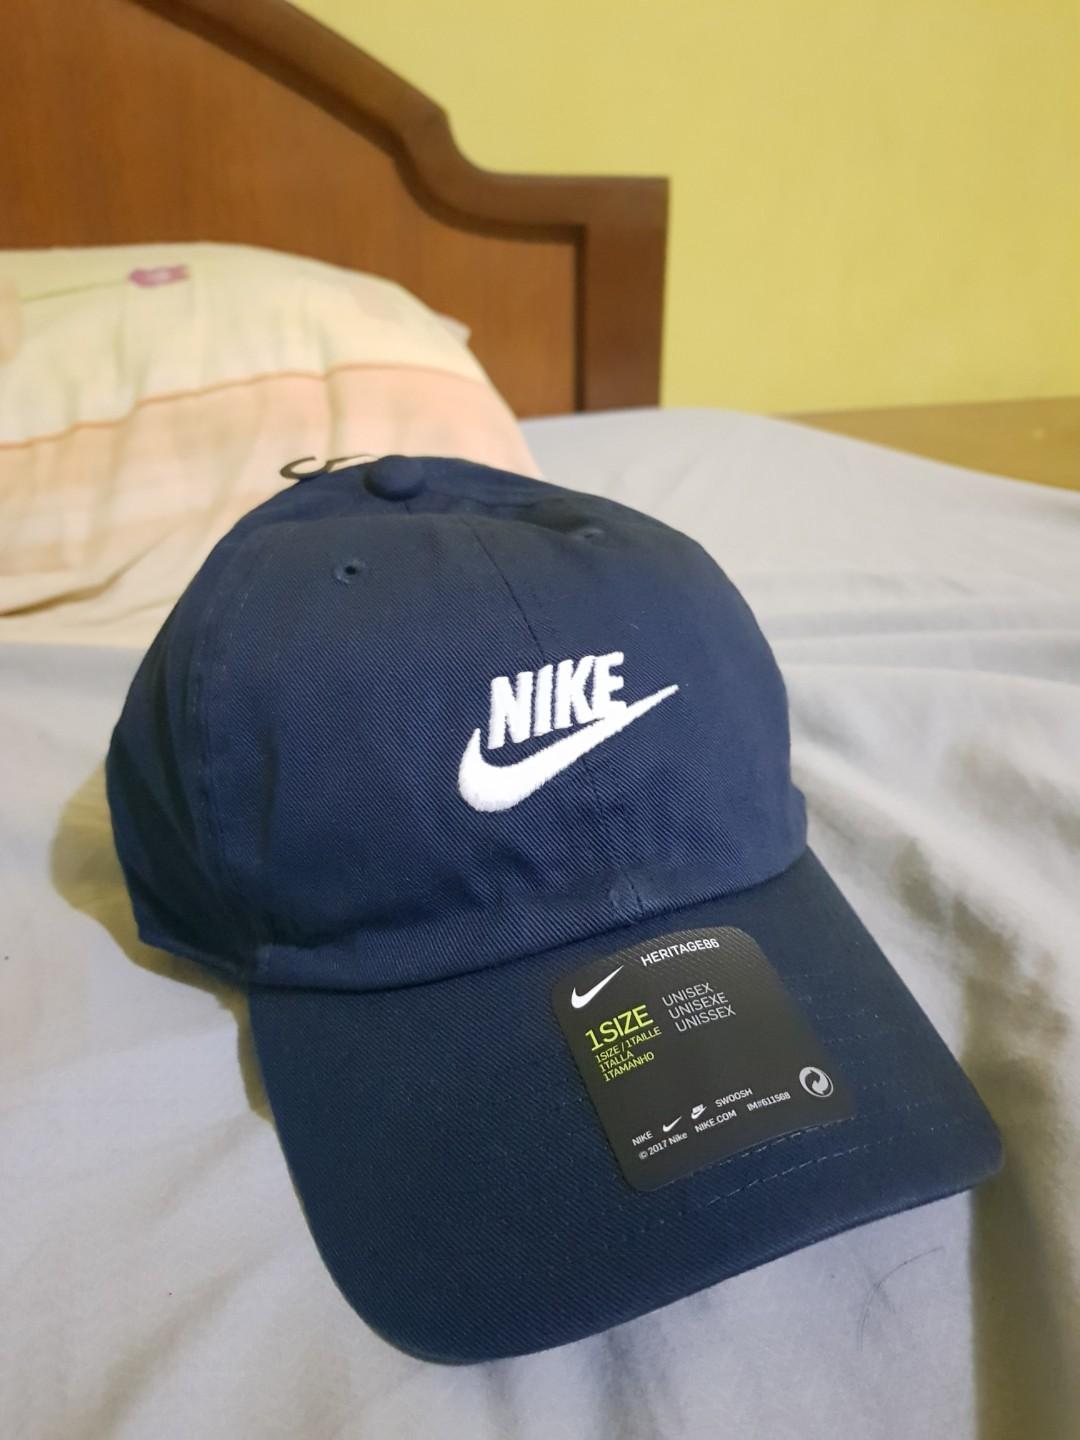 Nike Cap Original Heritage86 Navy Blue Men S Fashion Watches Accessories Caps Hats On Carousell